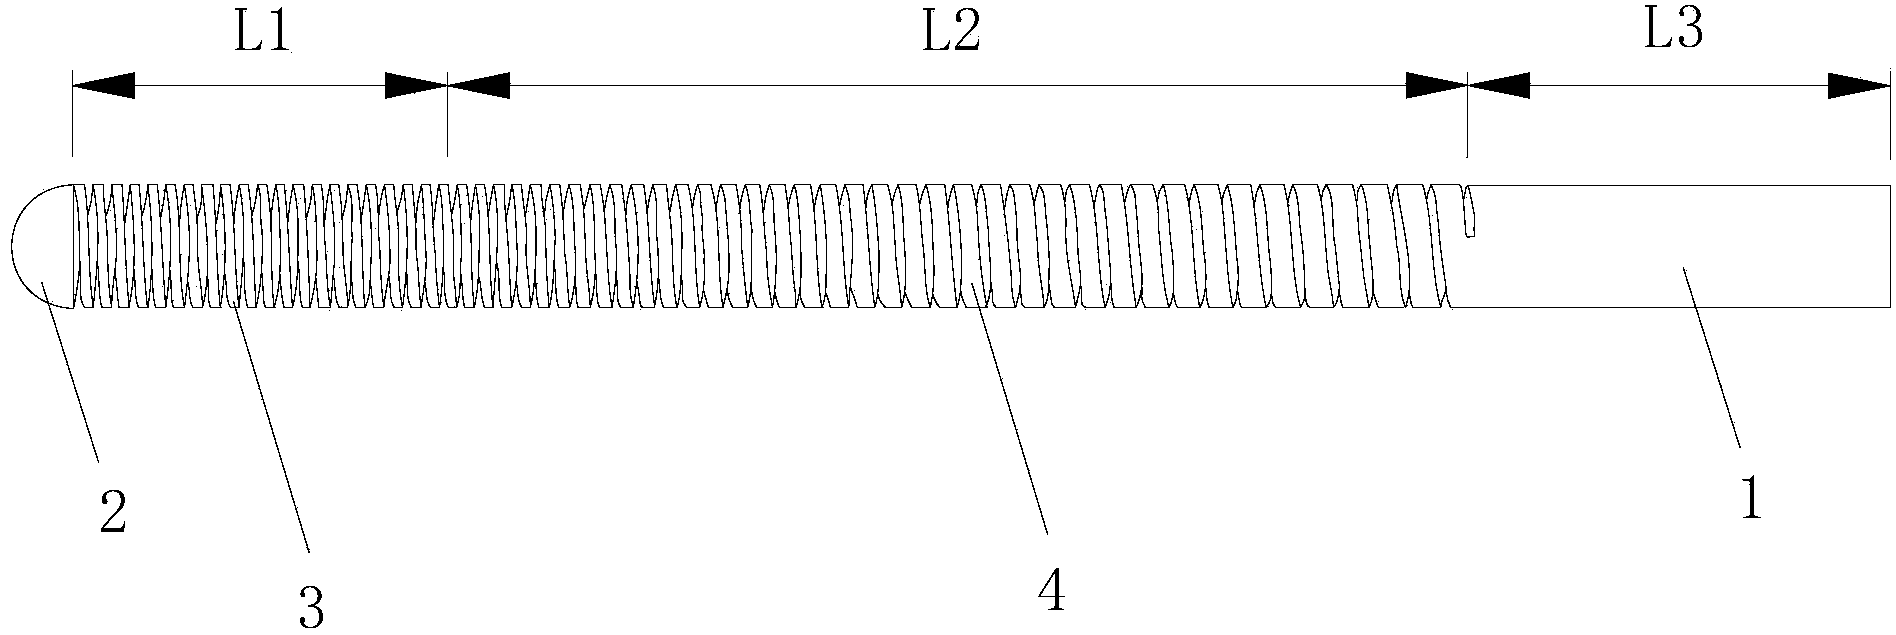 Titanium alloy guide wire for surgical interventional therapy